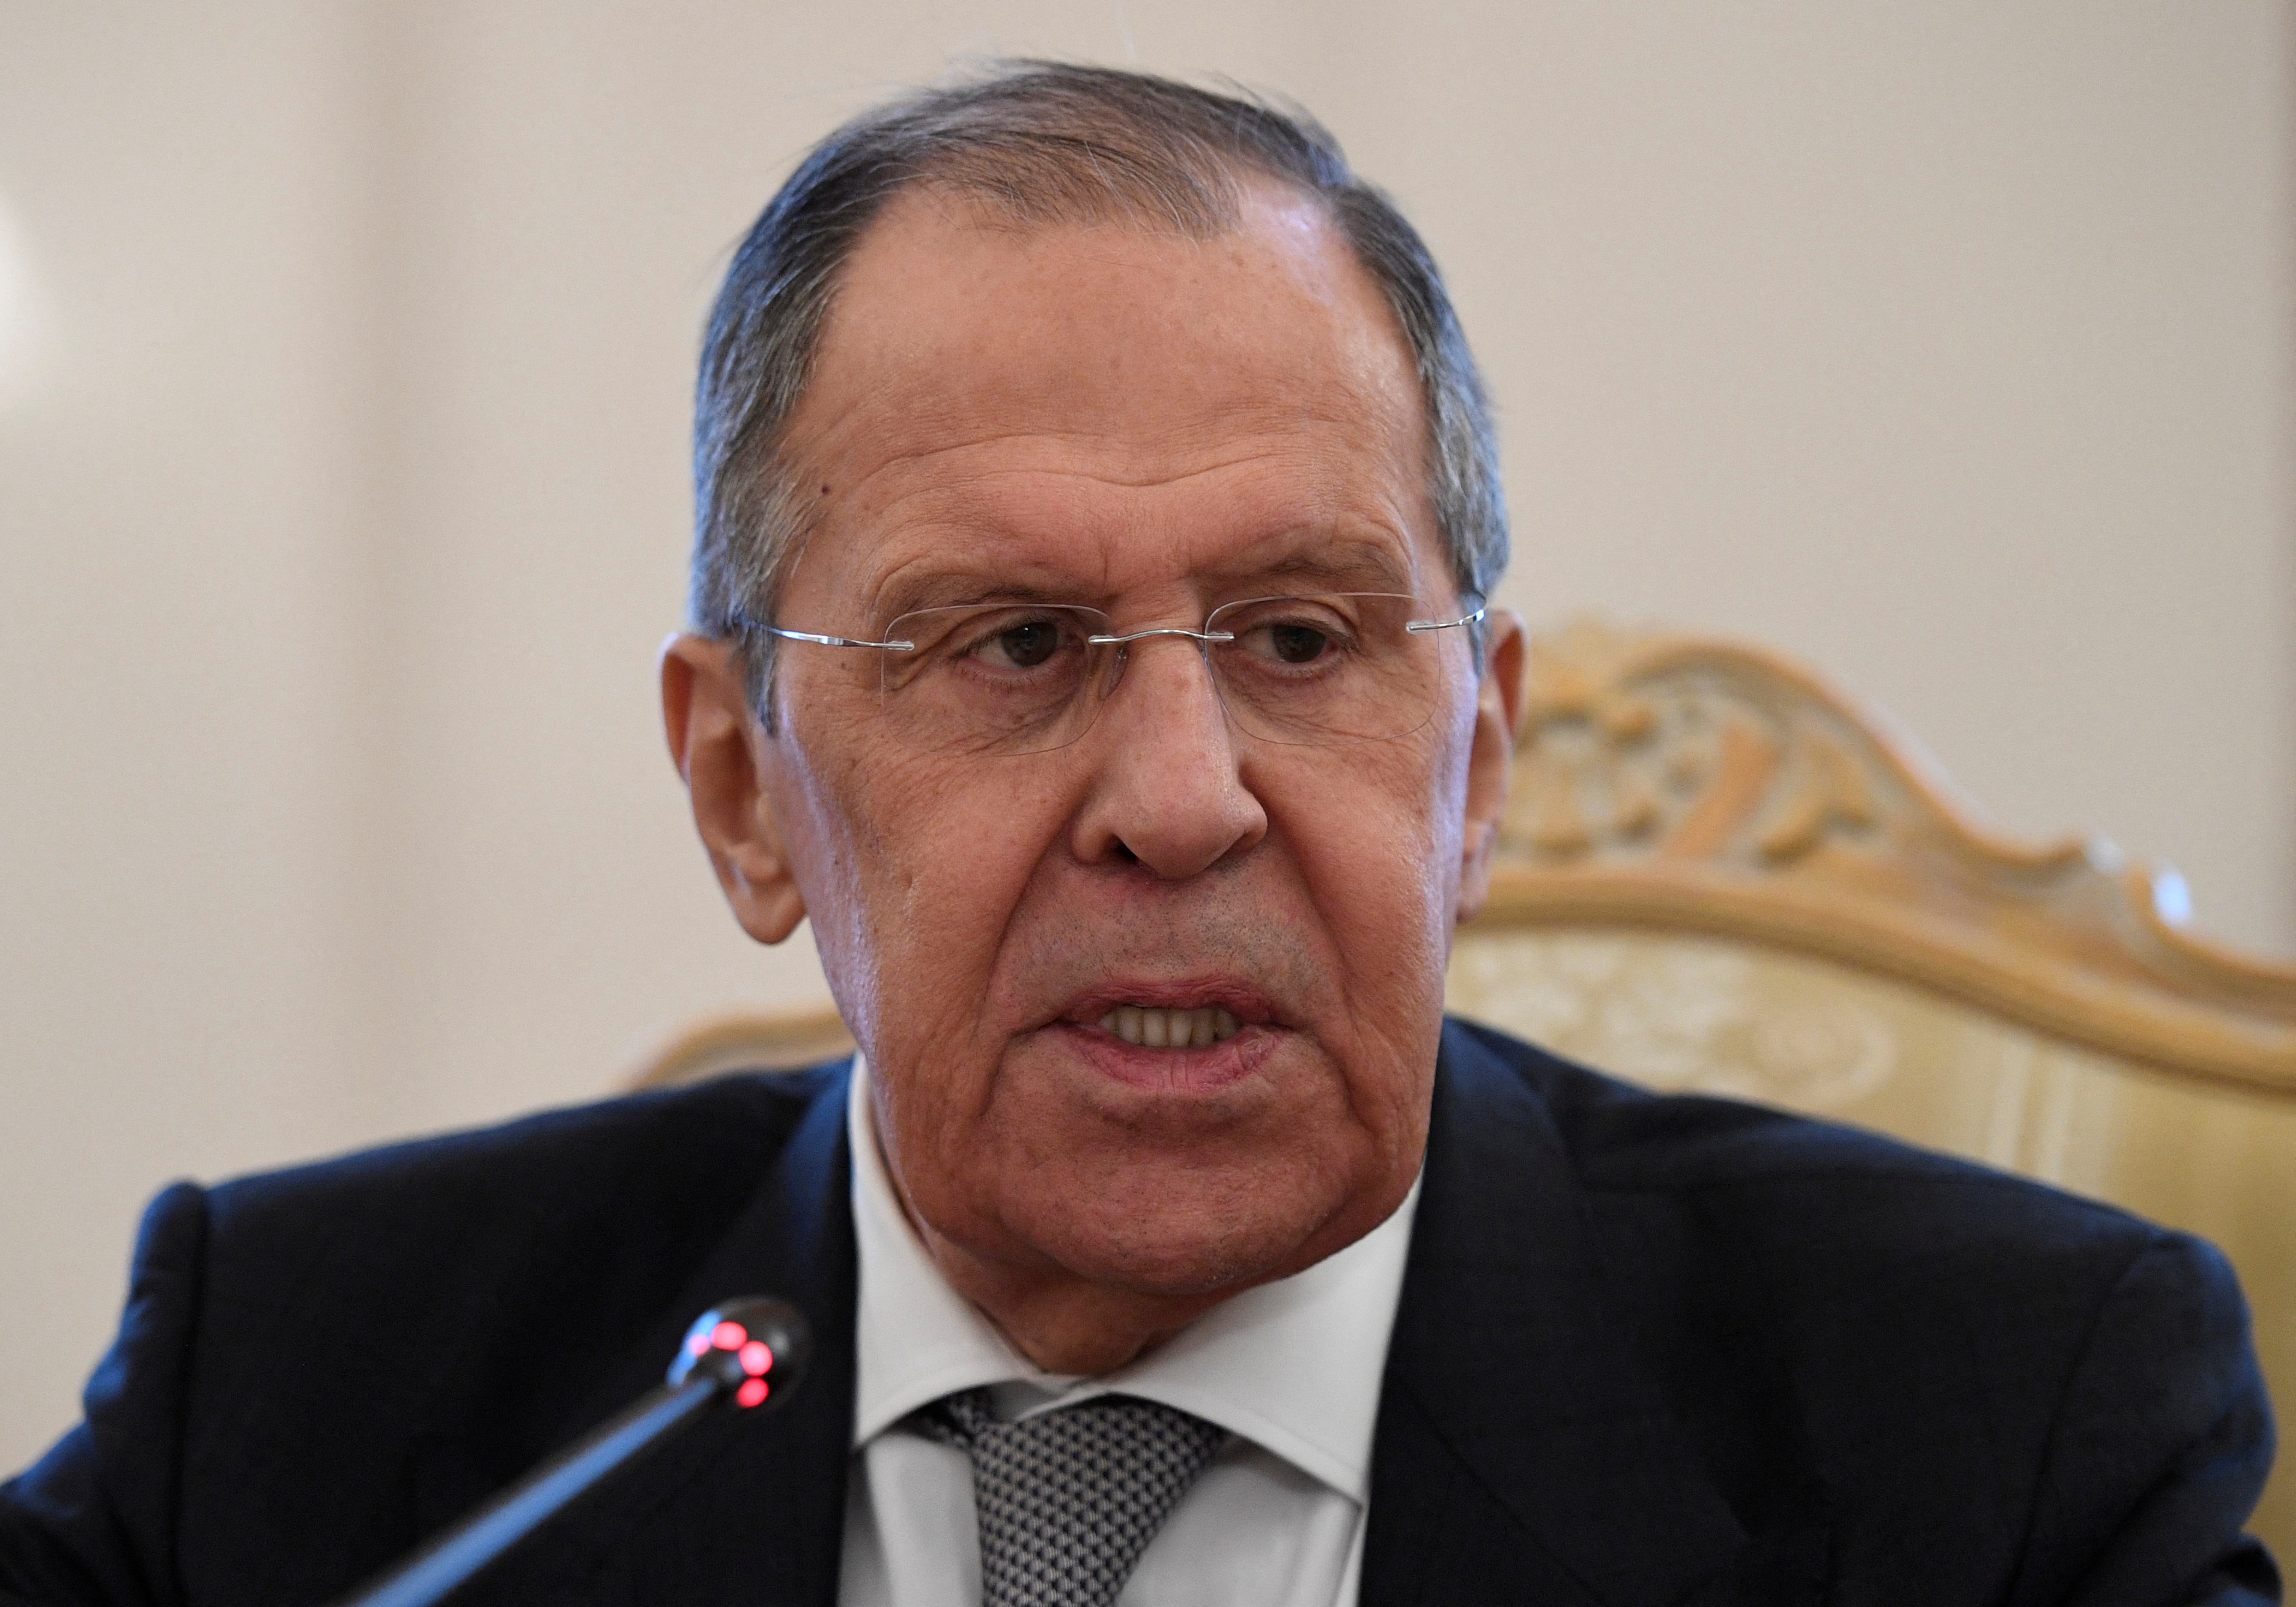 Russia's Foreign Minister Sergei Lavrov meets with Syria's Foreign Minister Faisal Mekdad in Moscow